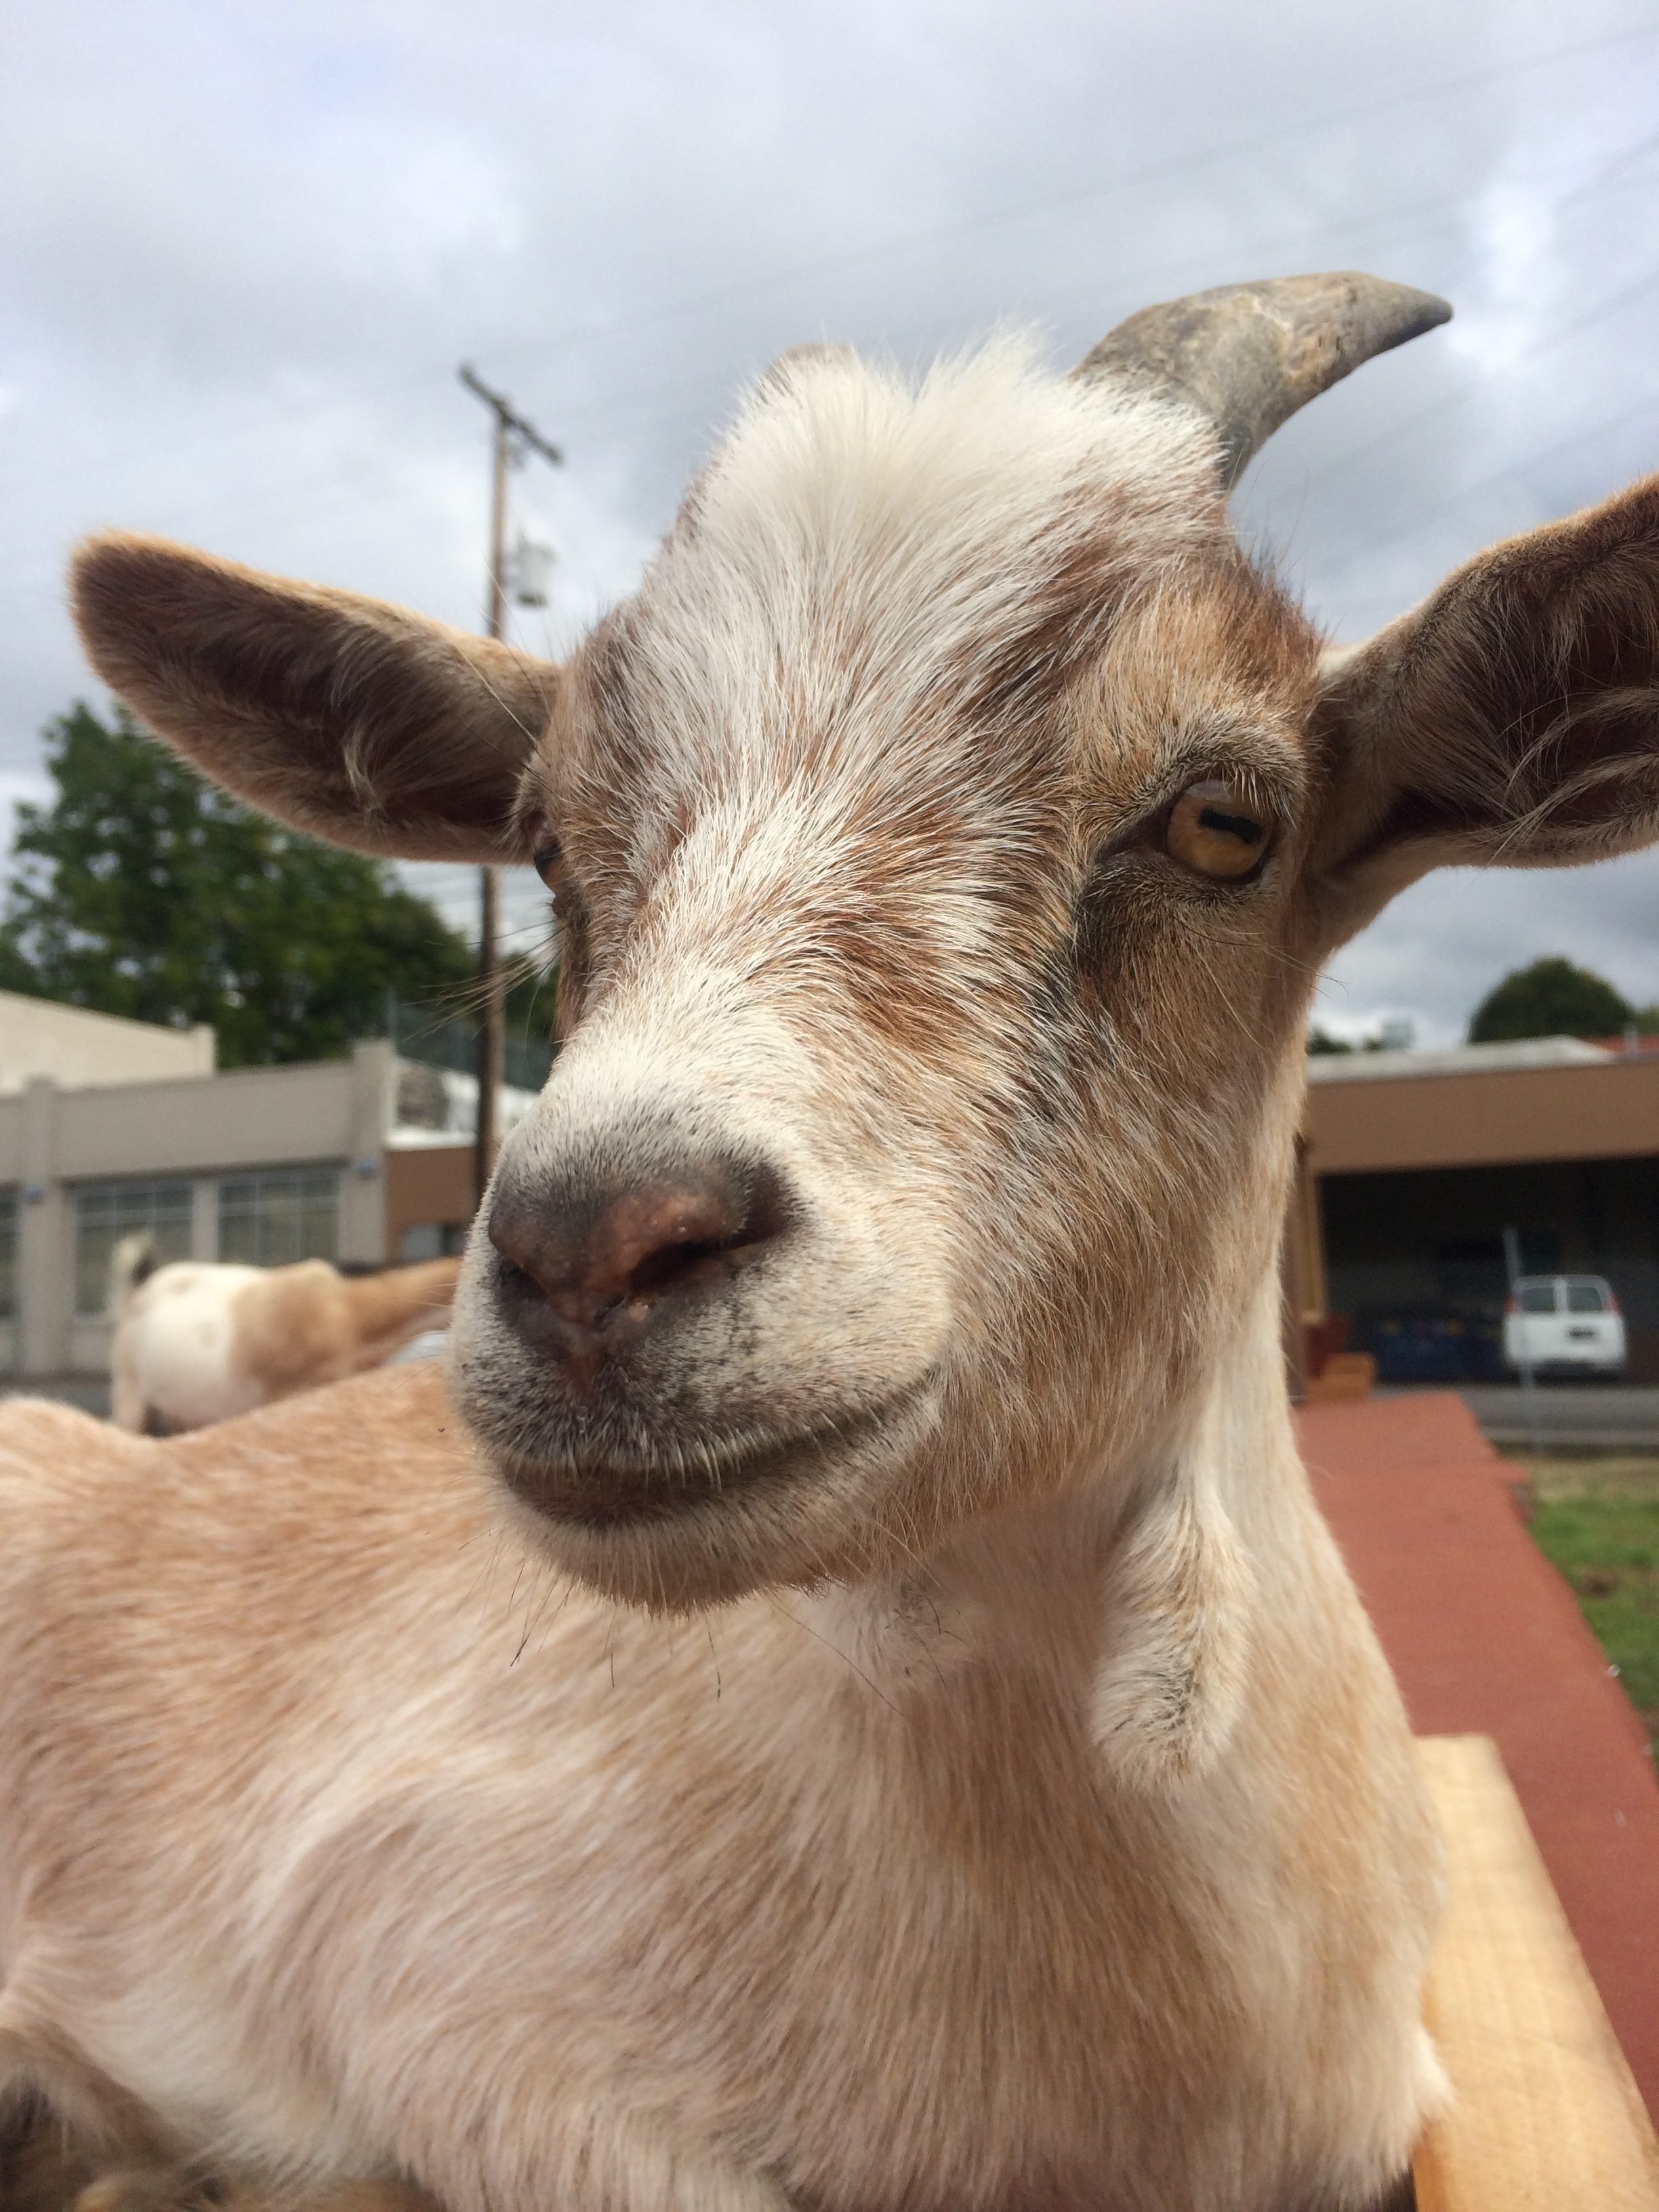 Close up of a brown and white goat.